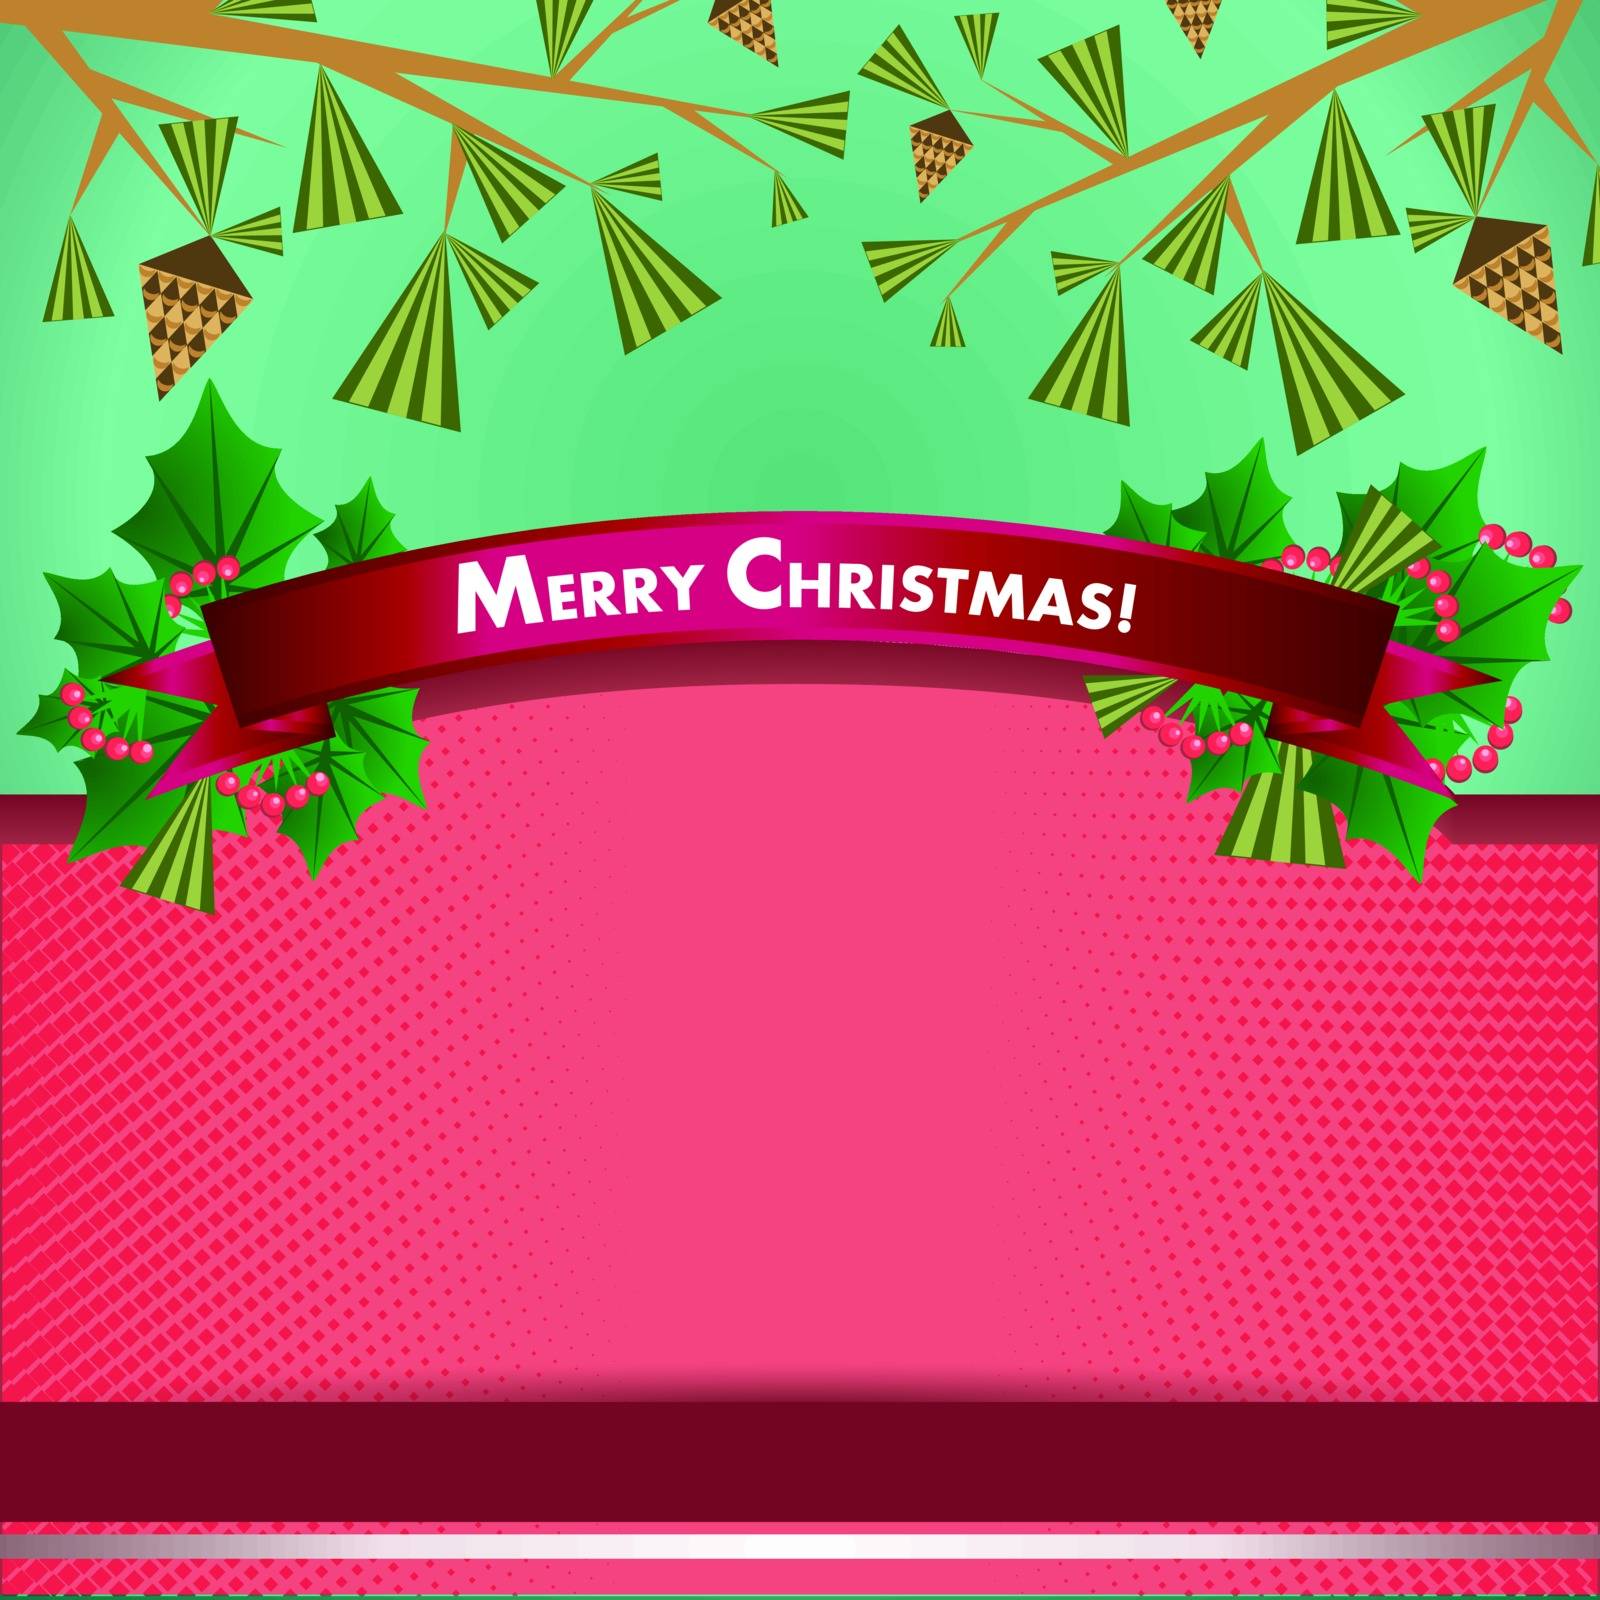 backdrop for christmas invitation or new year by heliburcka